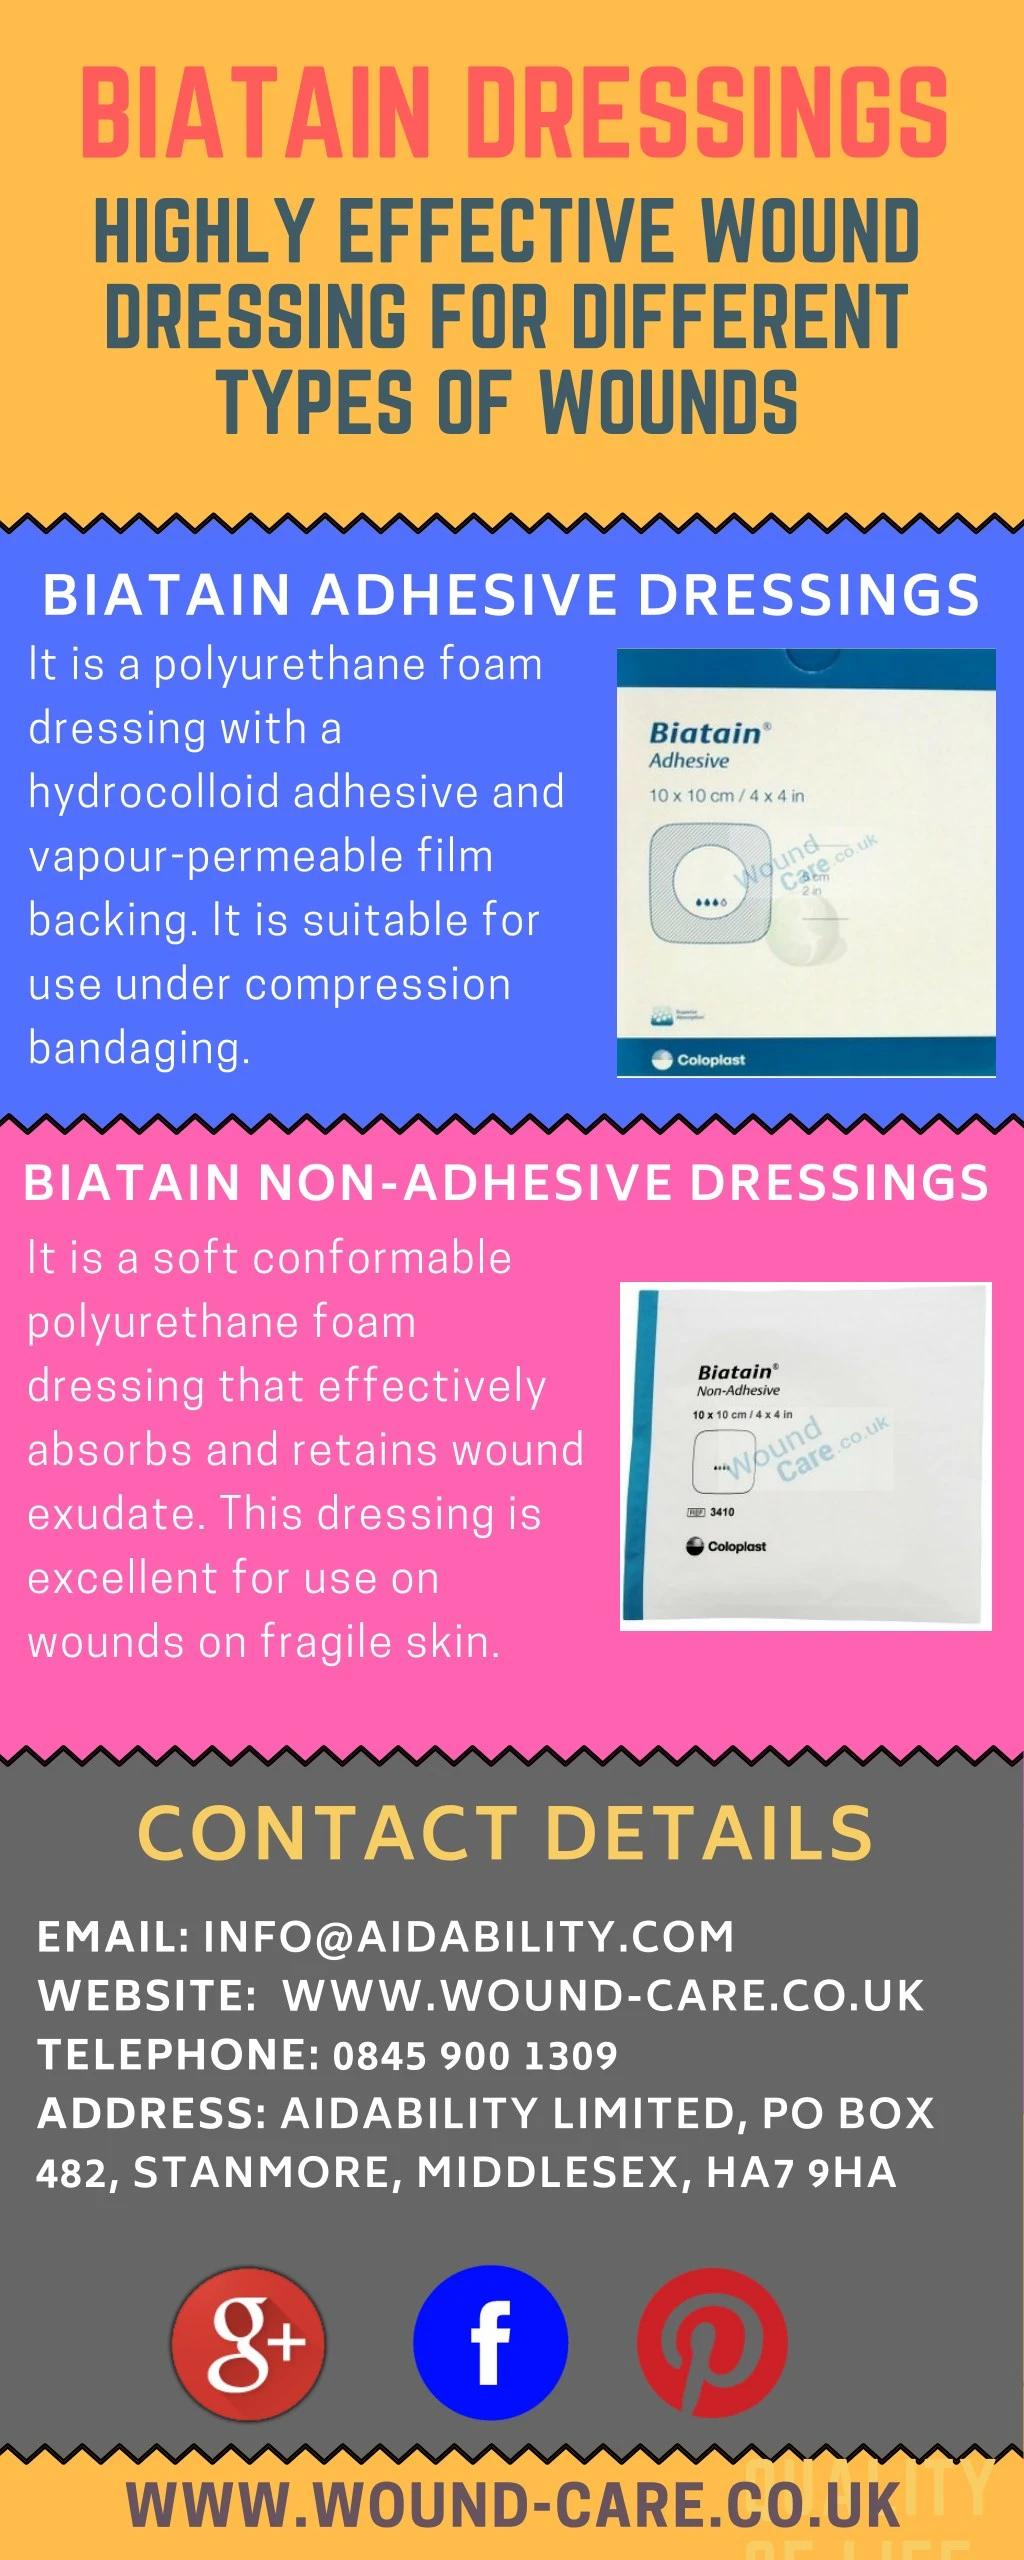 biatain dressings highly effective wound dressing